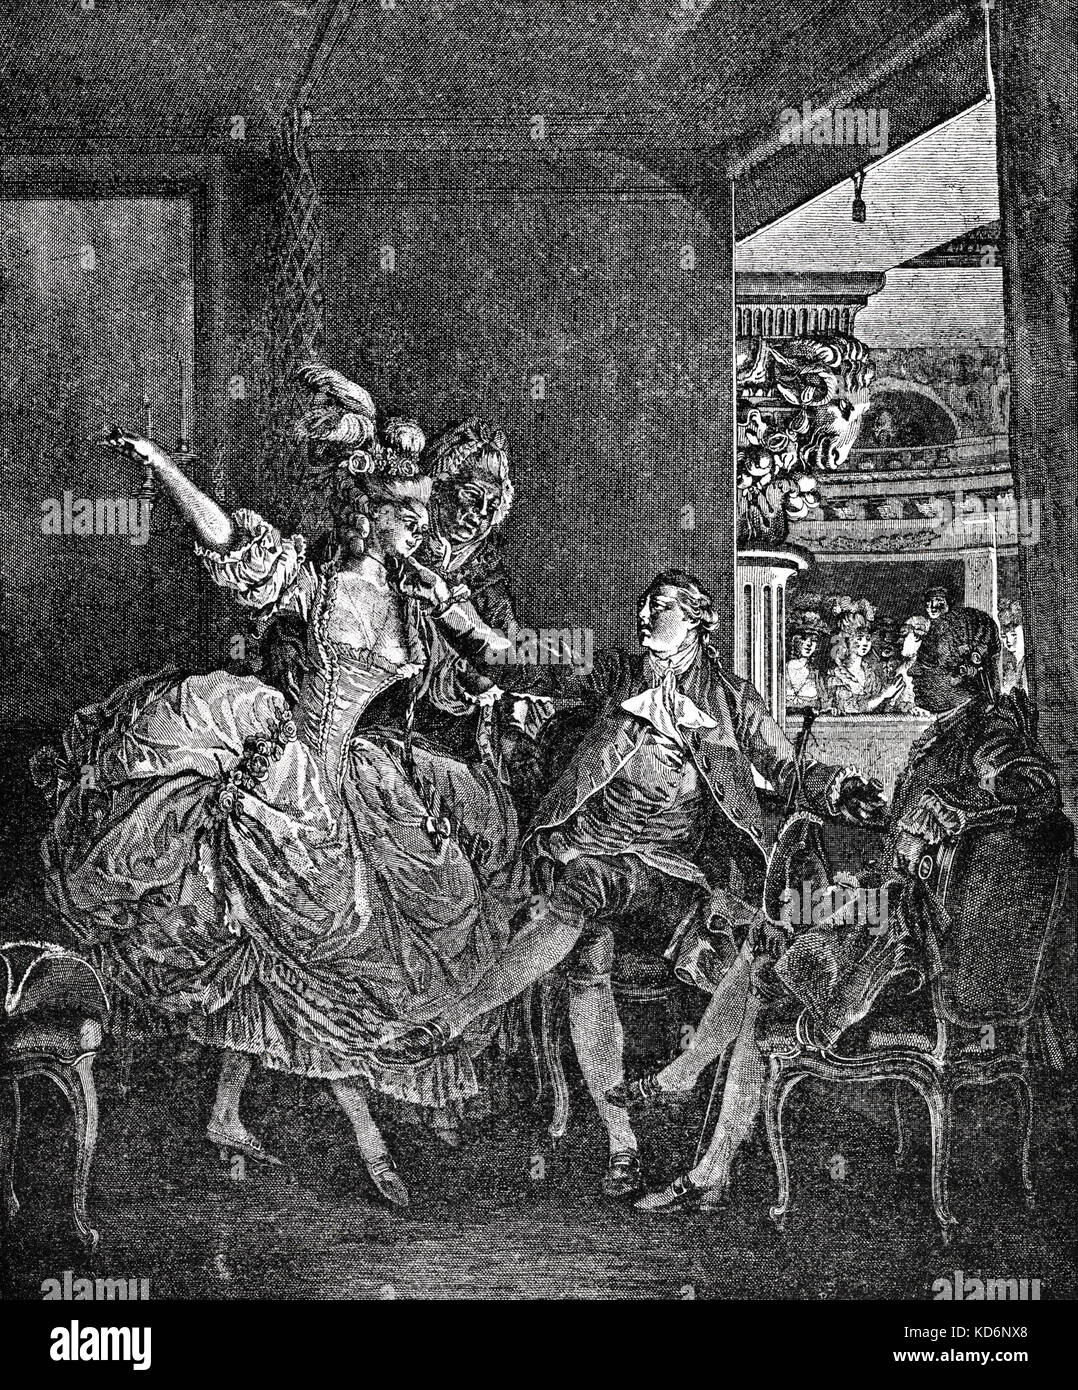 La petite loge - the theatre box. Actress/performer being presented to two gentlemen by older woman. Typical 18th century fashion.  Rococo. Engraving by Moreau. Breeches, overcoat. Ancien Régime Stock Photo